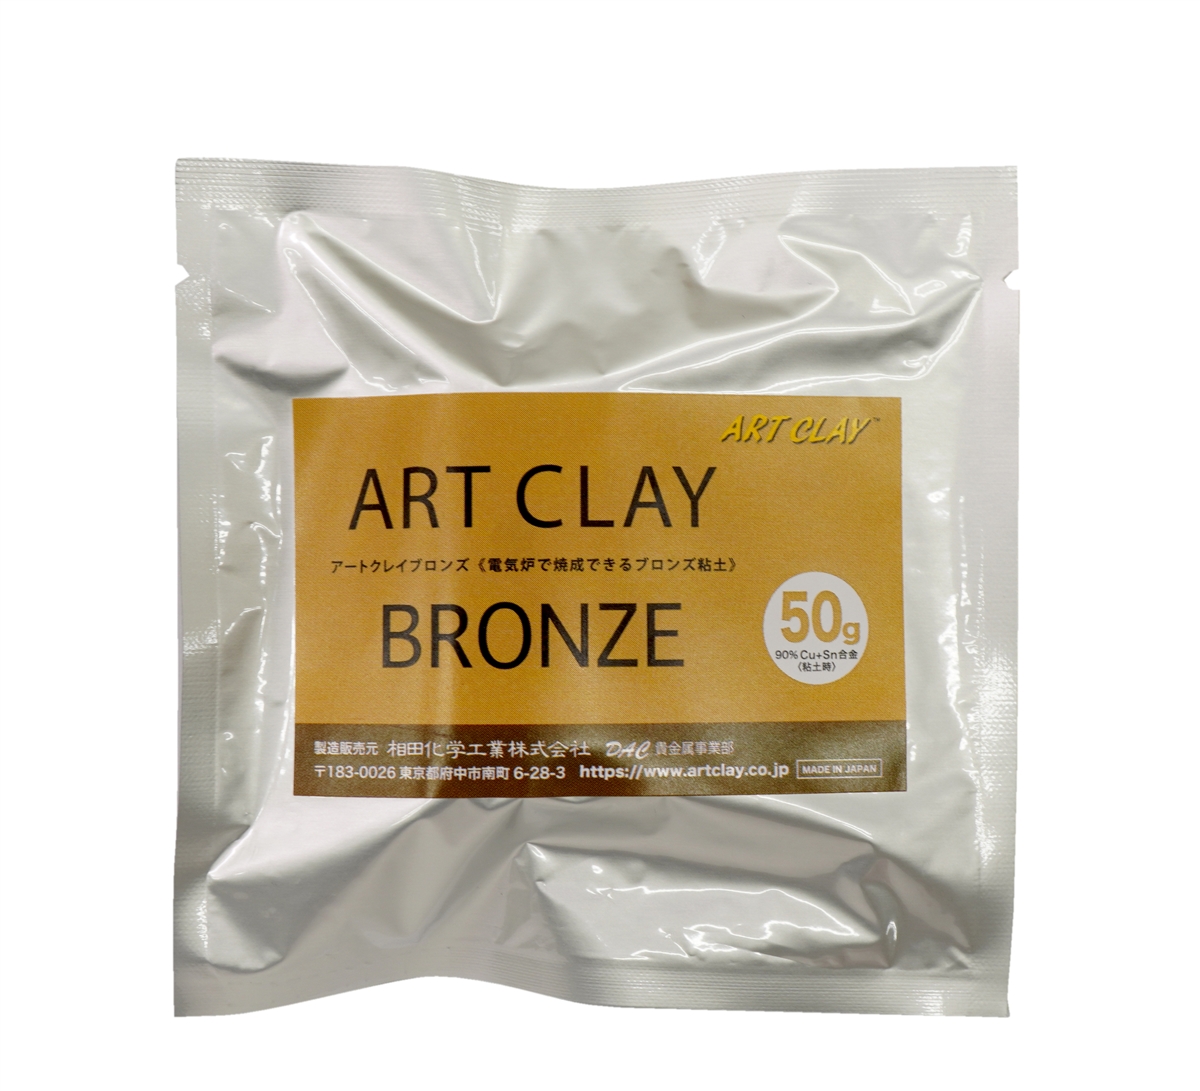 Bronze Clay for Jewelry Making and Sculpture - FeltMagnet